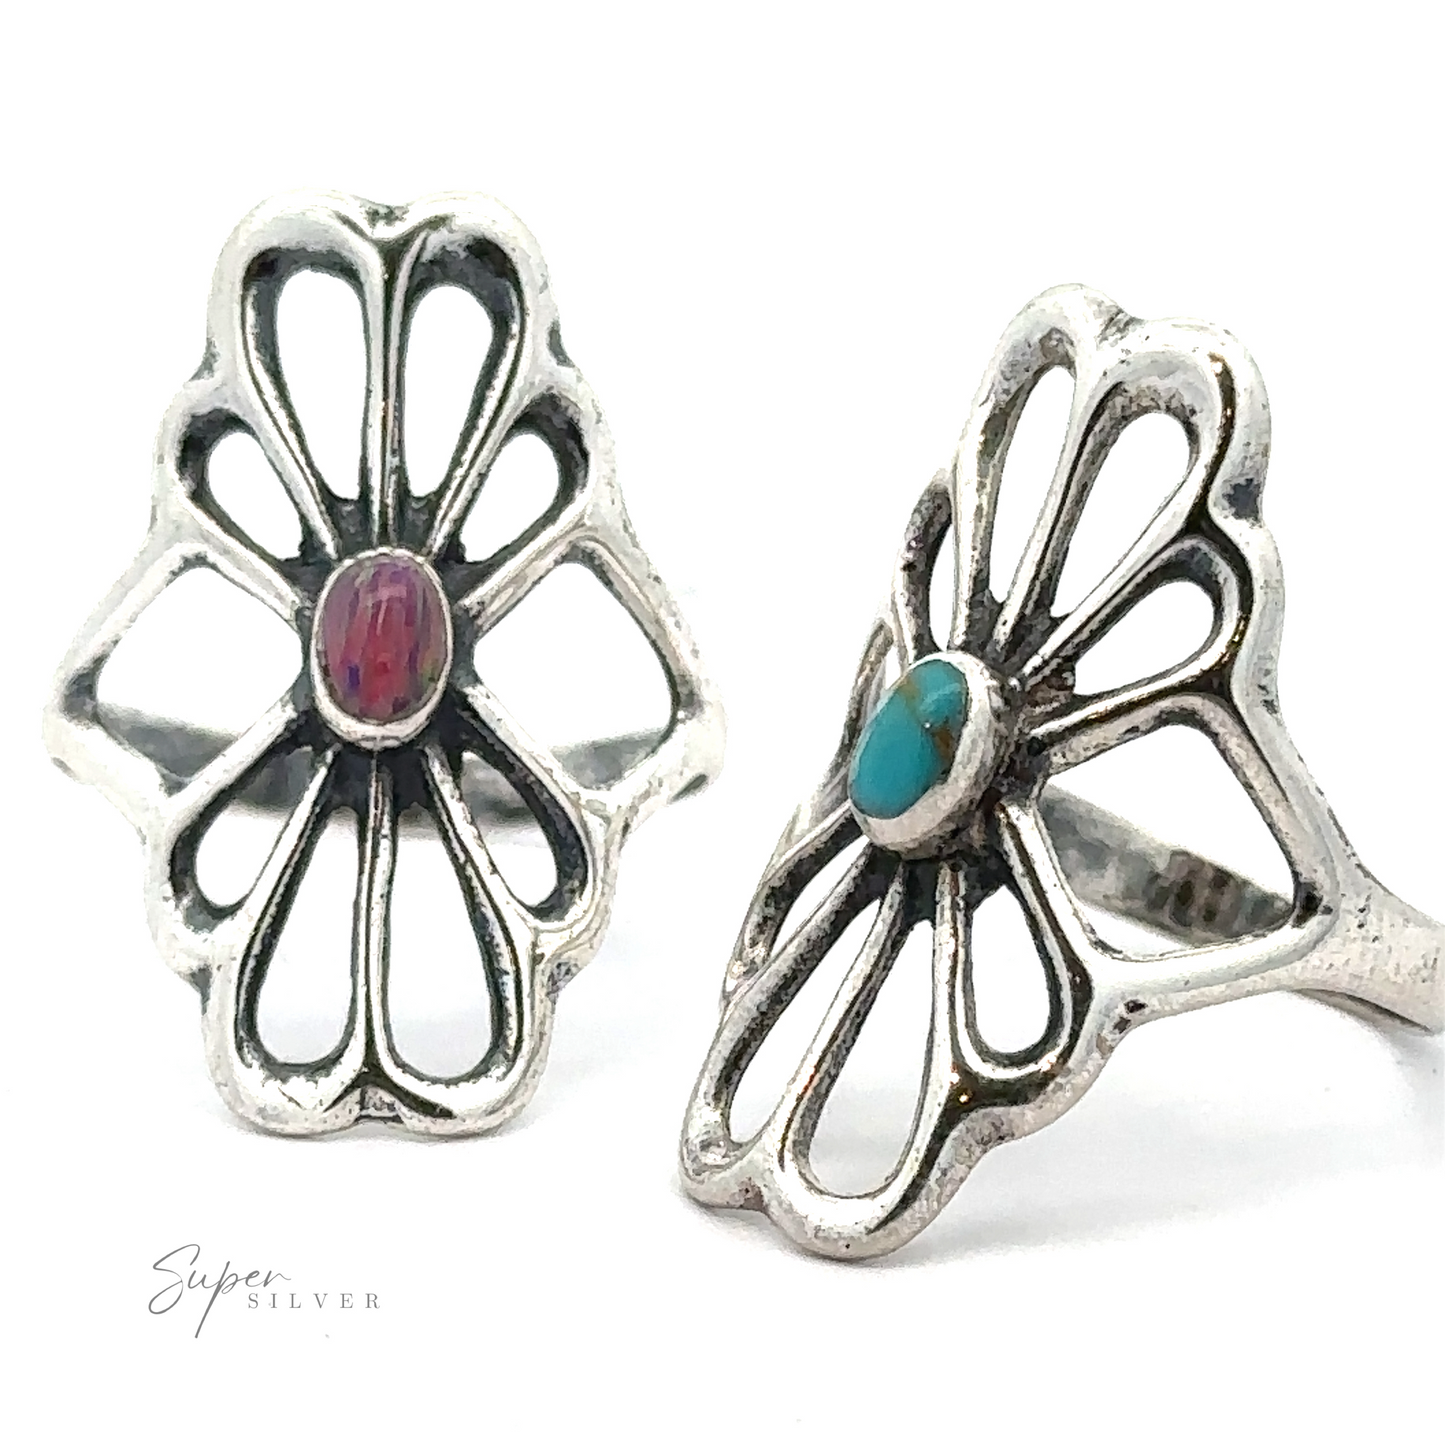 Two sterling silver American Made Flower Rings feature different gemstones in the center, one red and one blue, against a white background. Handcrafted in America, these exquisite pieces bear the brand name "Super Silver" in the bottom left corner.